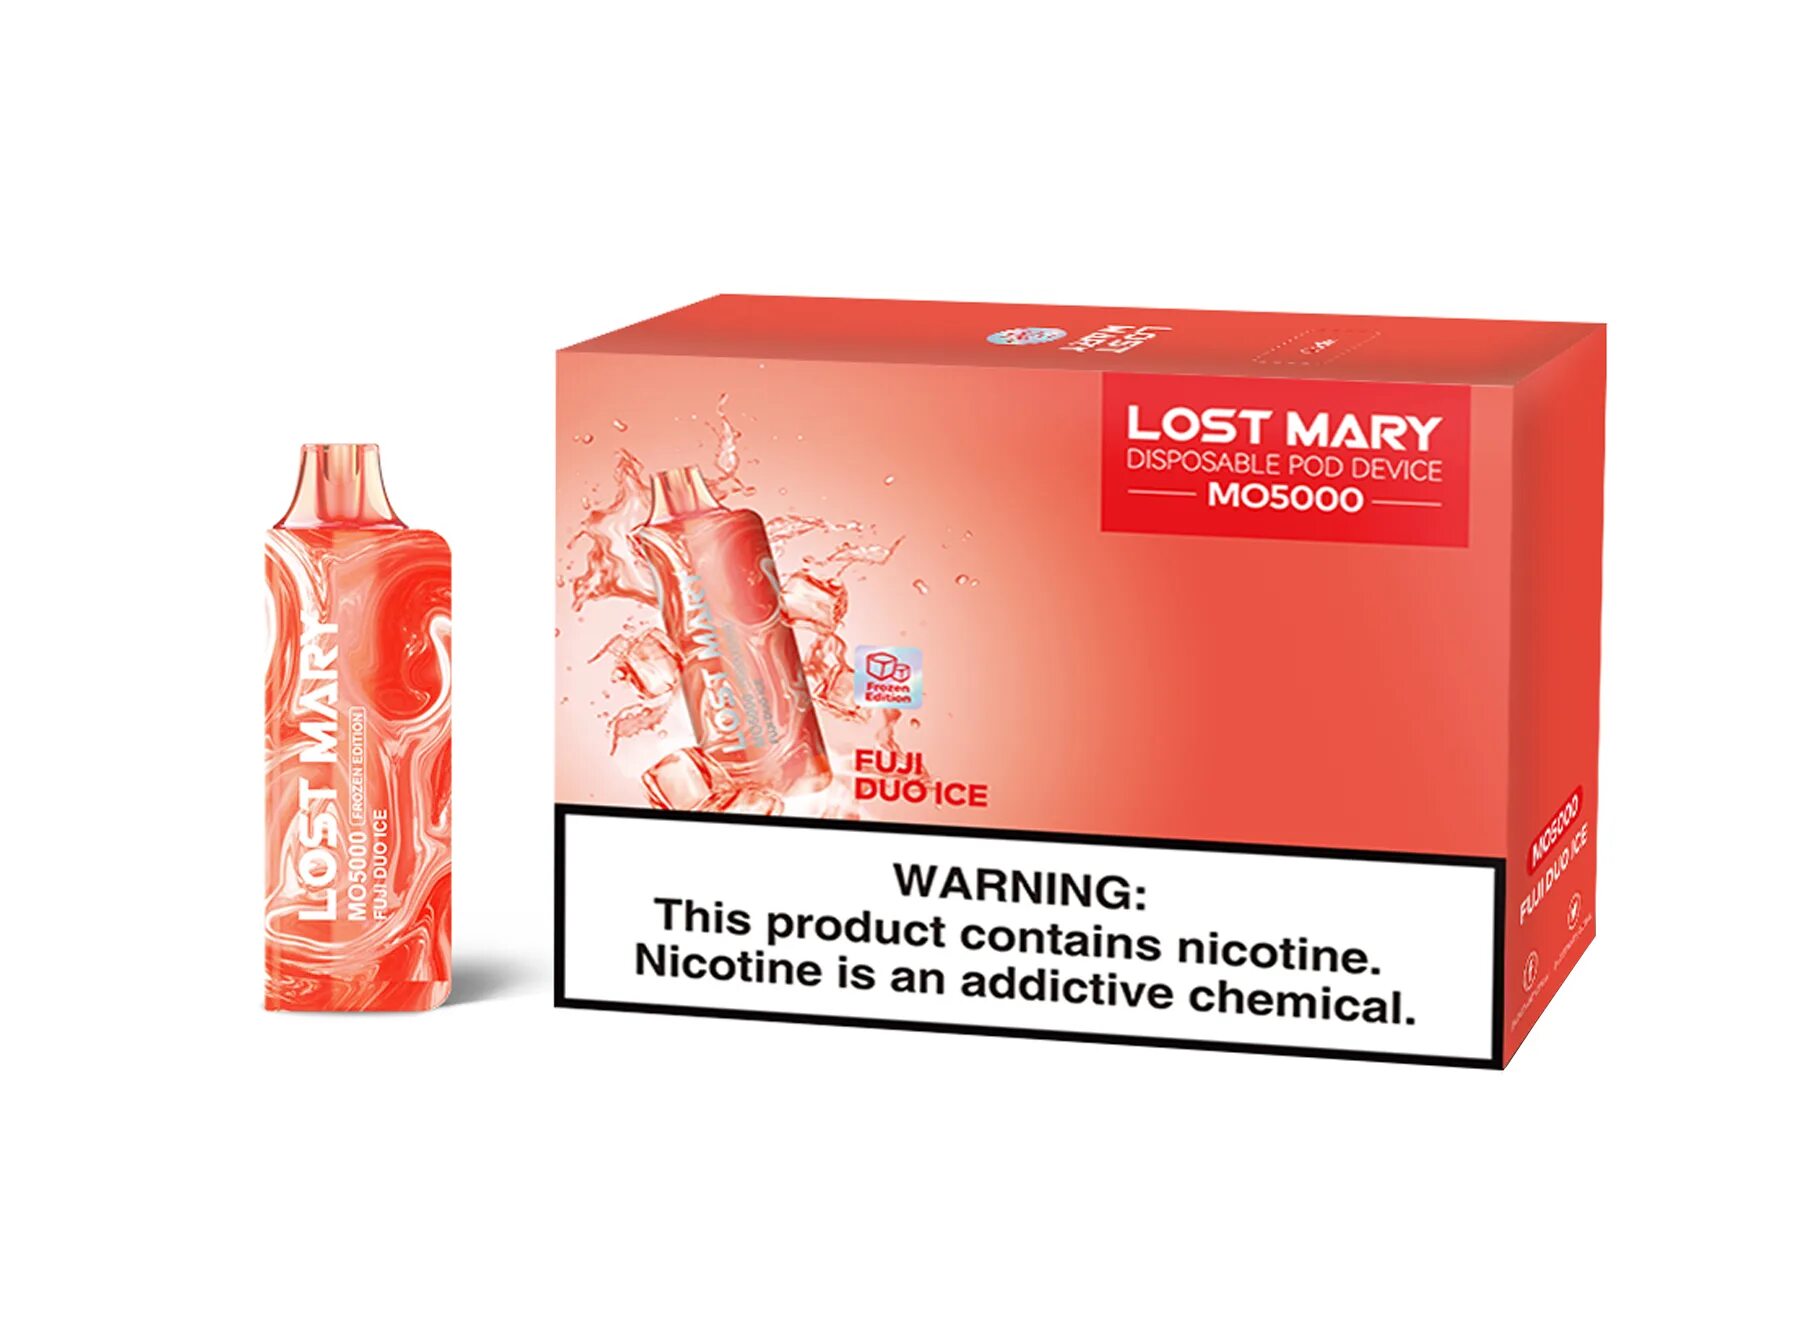 Lostmary mo5000. Одноразки Lost Mary 5000. Lost mary индикатор